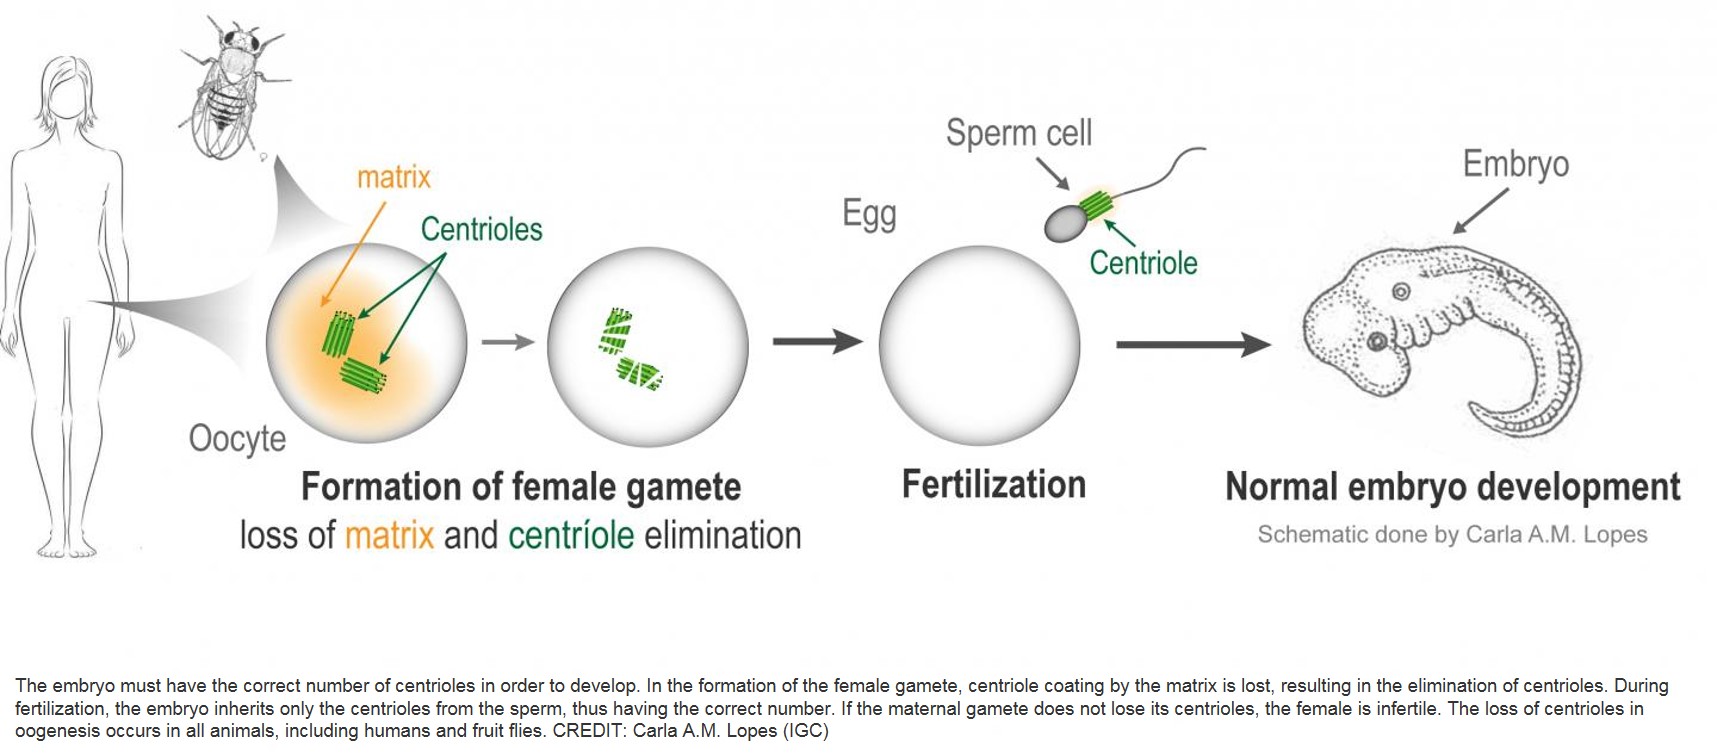 A critical inheritance from dad ensures healthy embryos